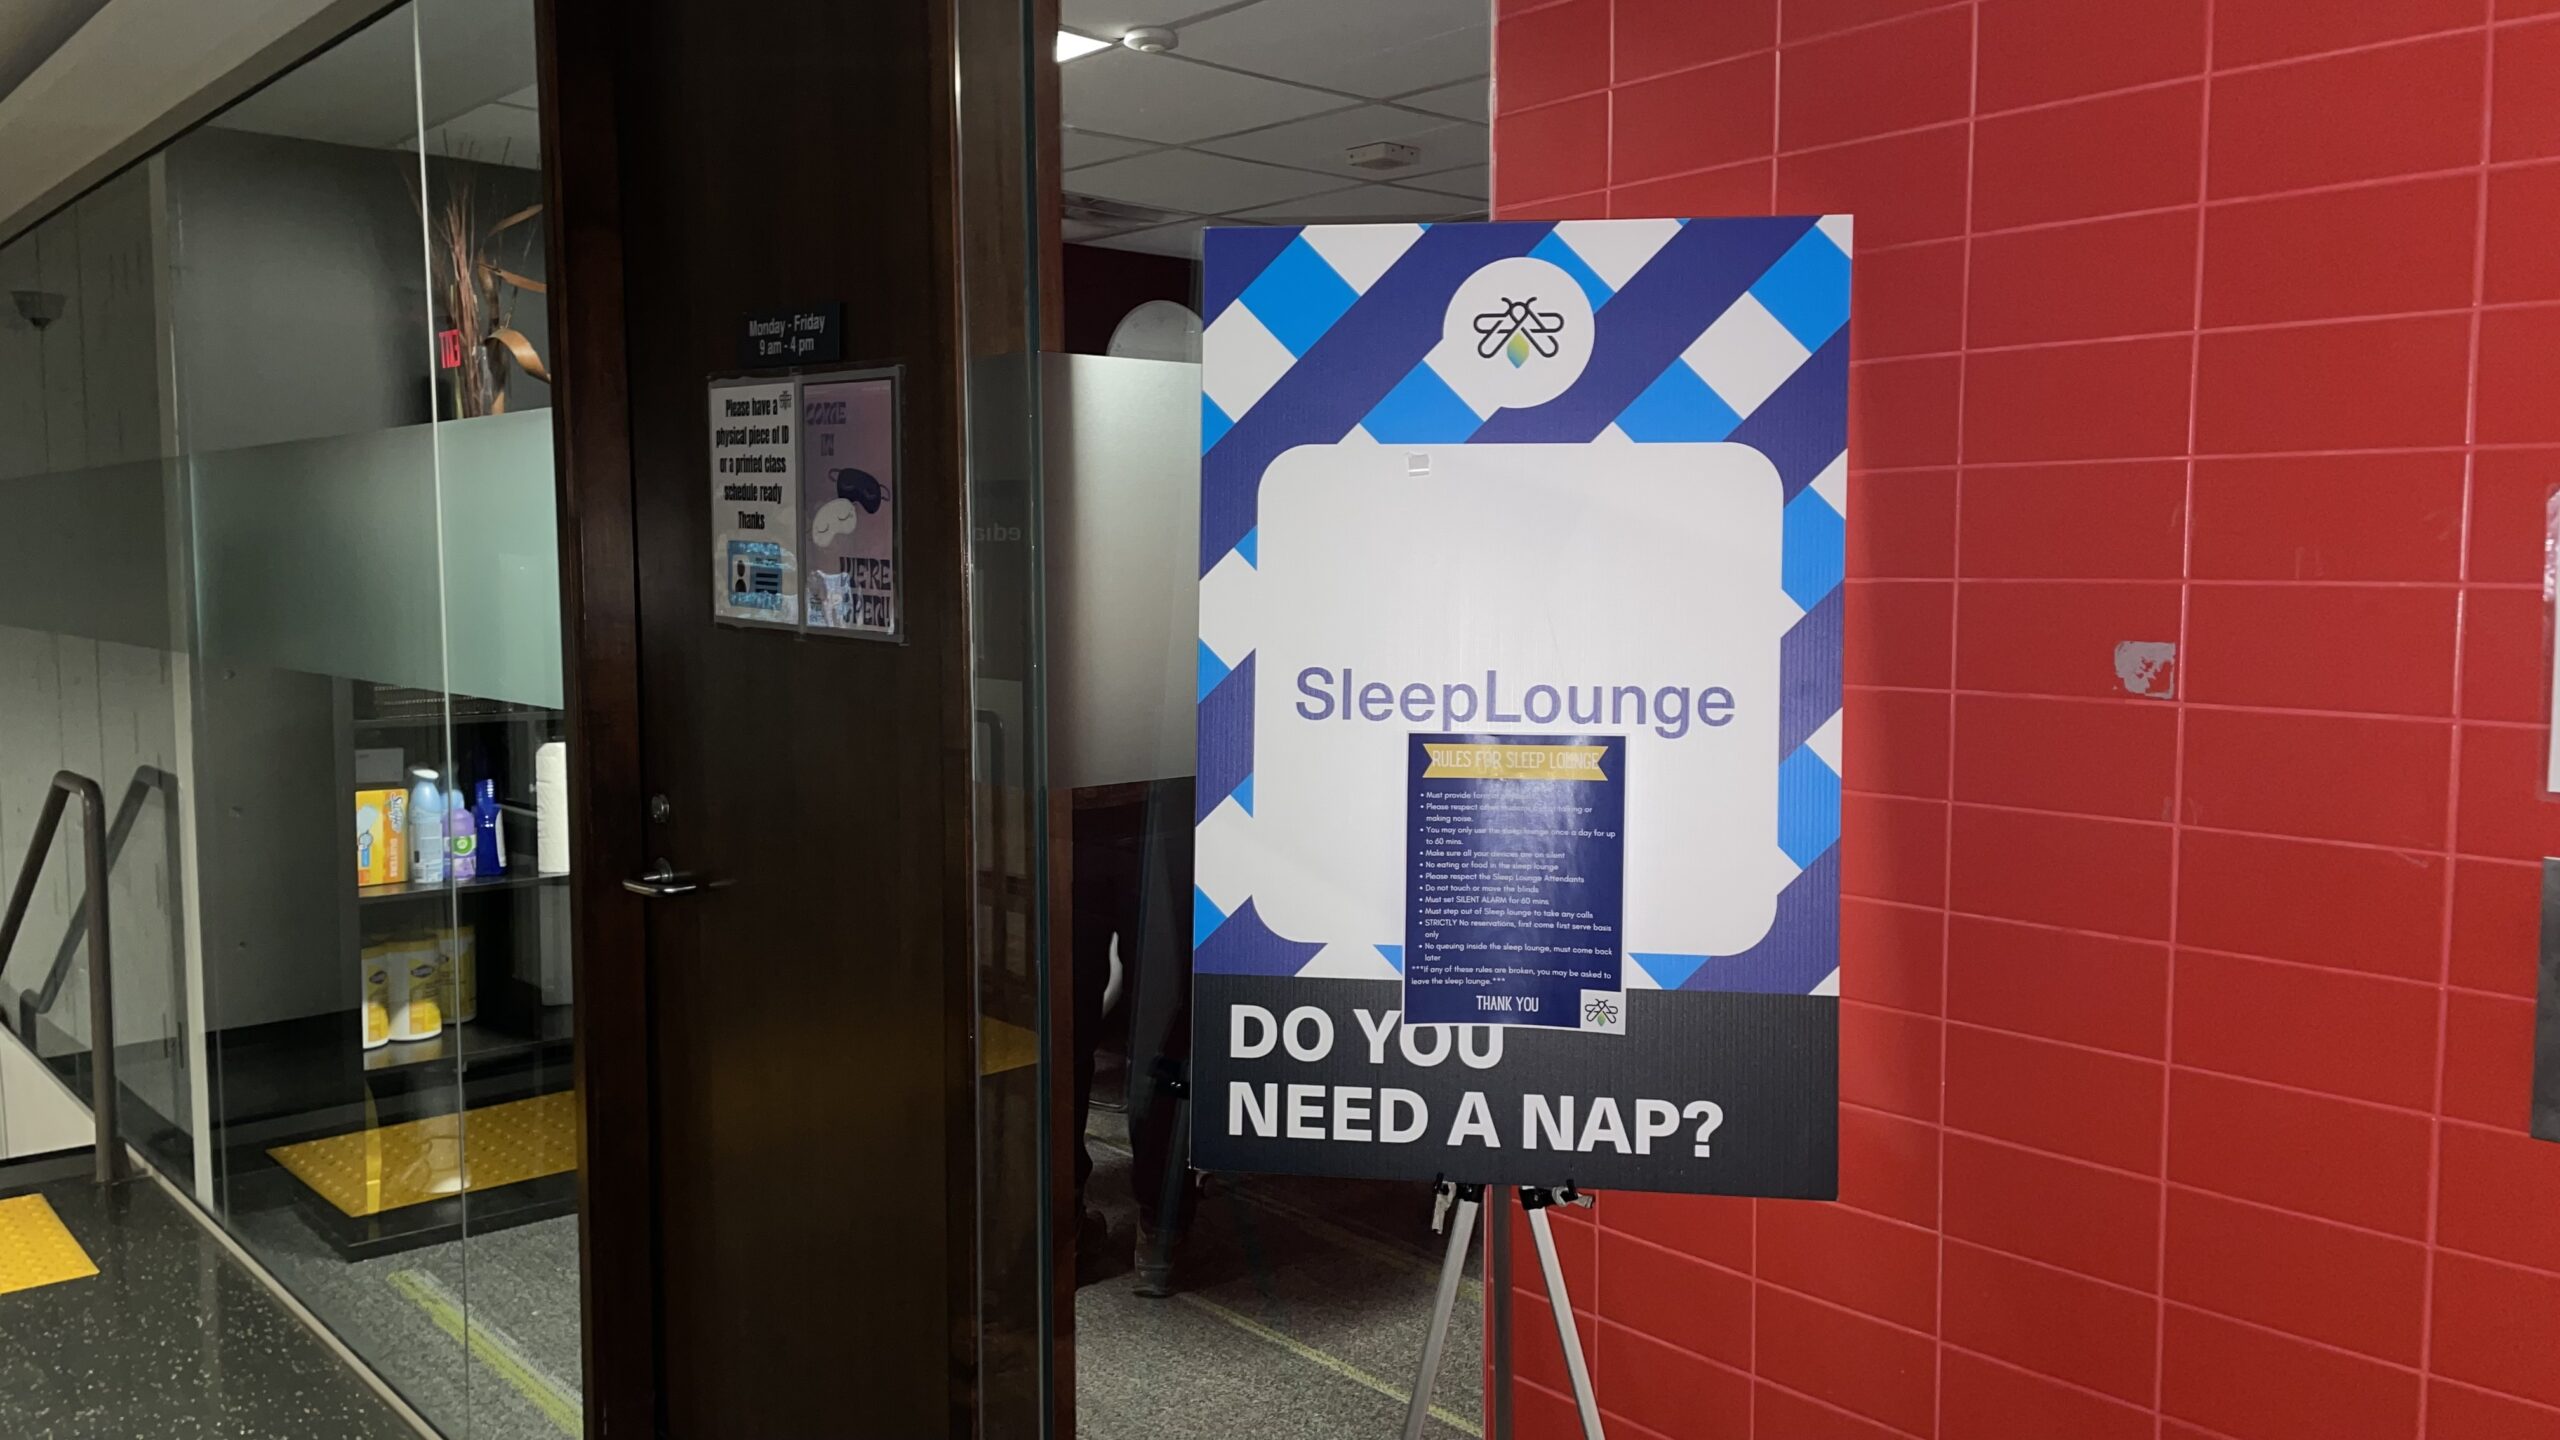 Humber's student sleep lounge reopens after being closed due to COVID